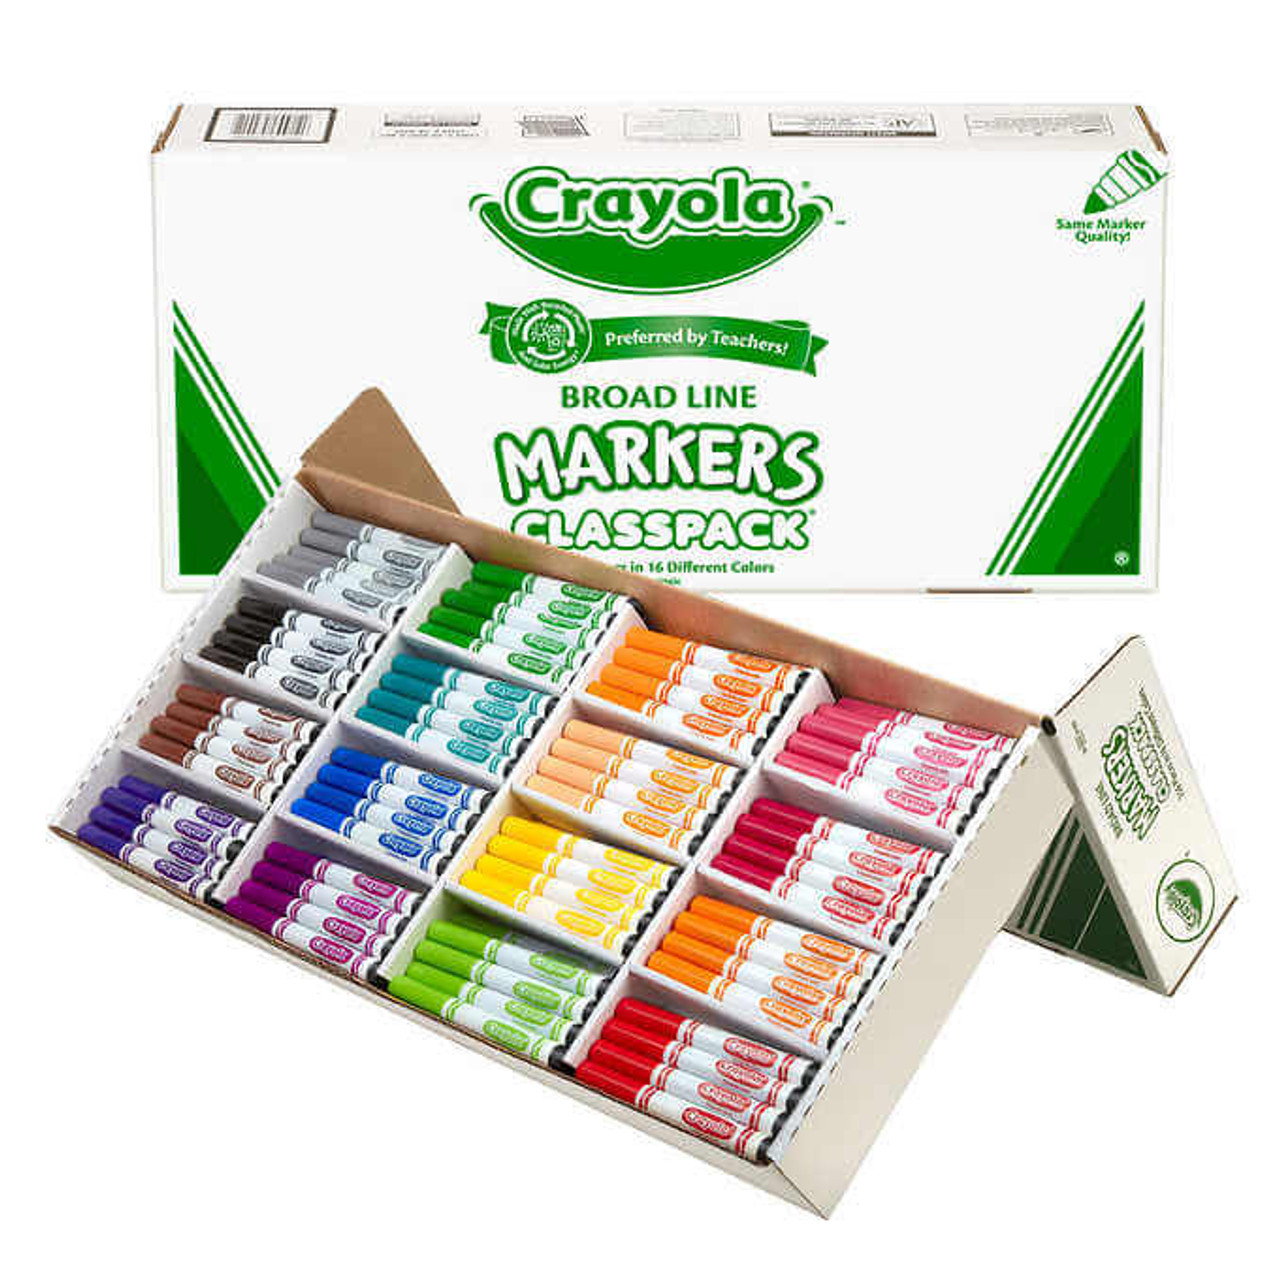 Crayola Broad Line Markers Classpack - 256-count | Vibrant Coloring and Artistry-Chicken Pieces